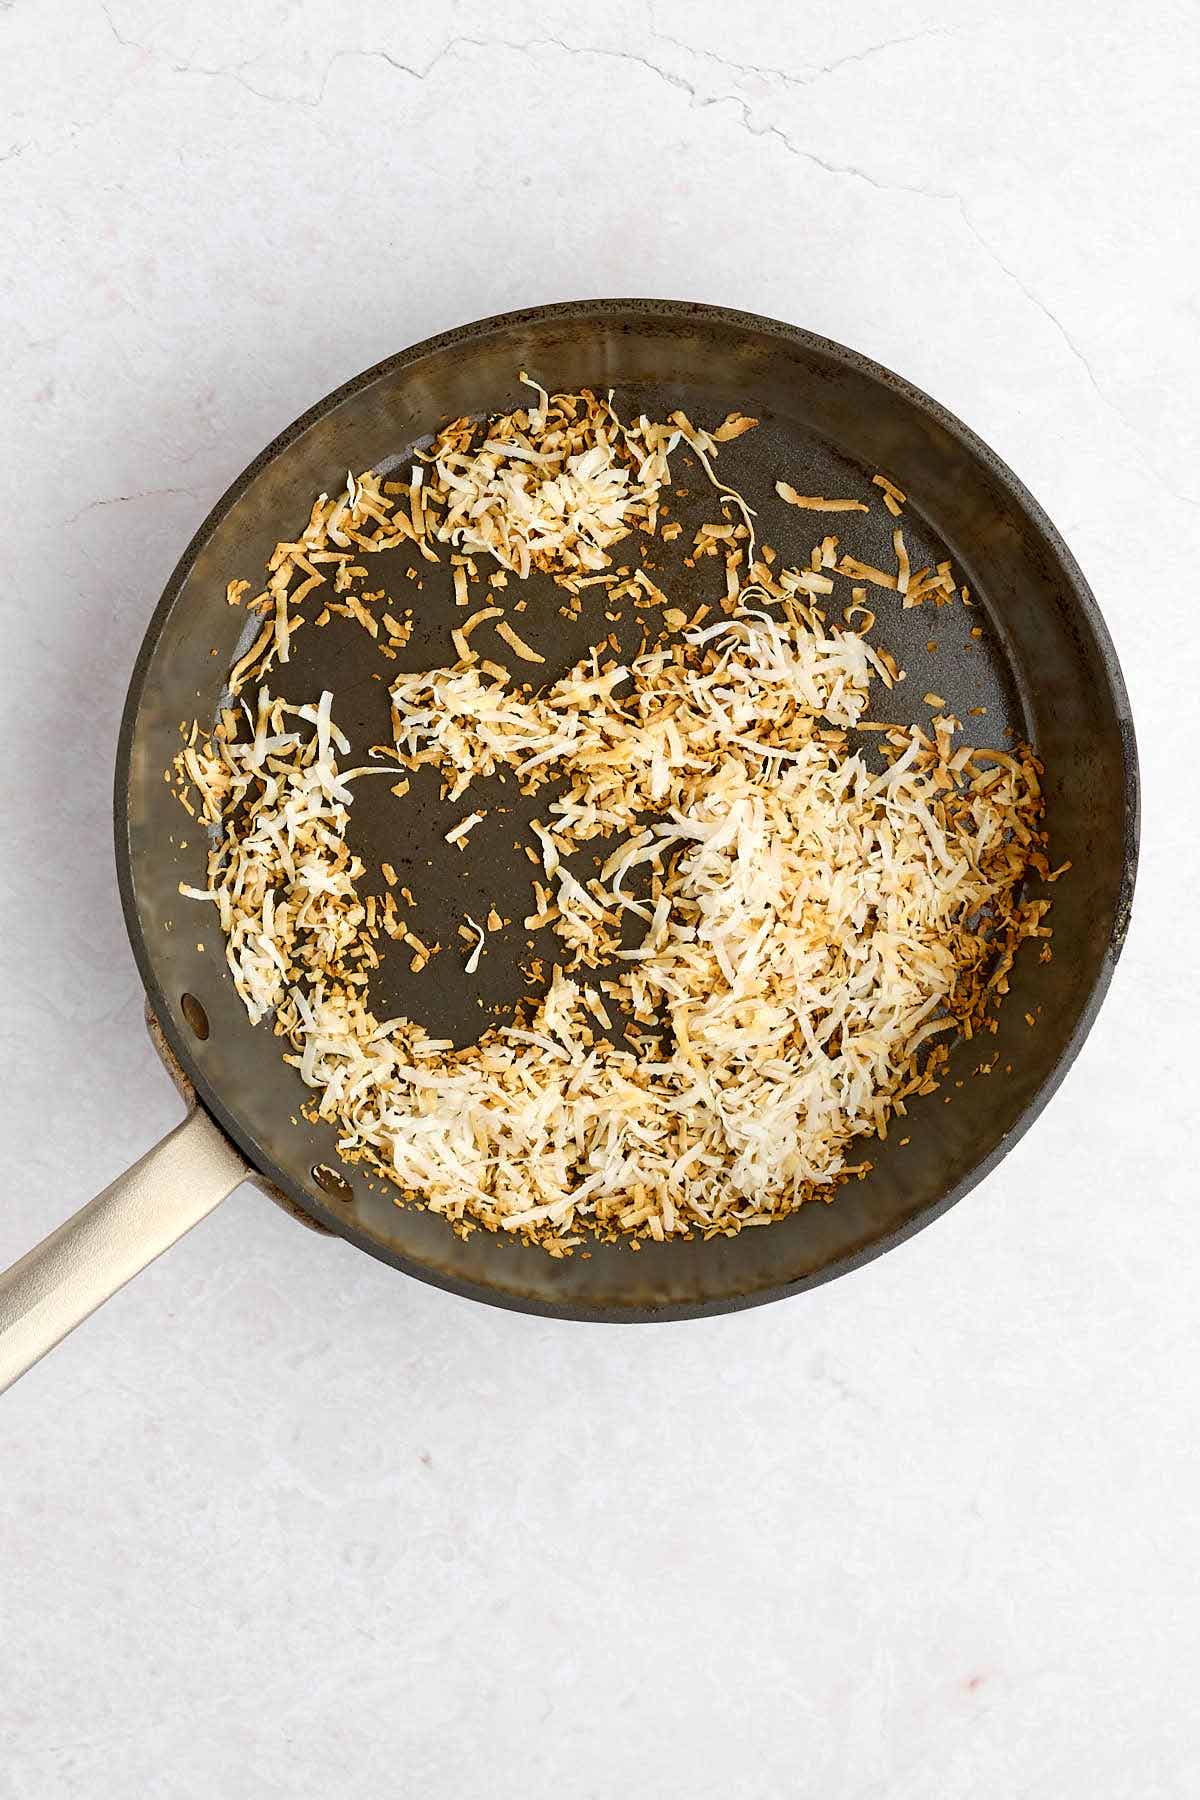 Skillet with toasted coconut.